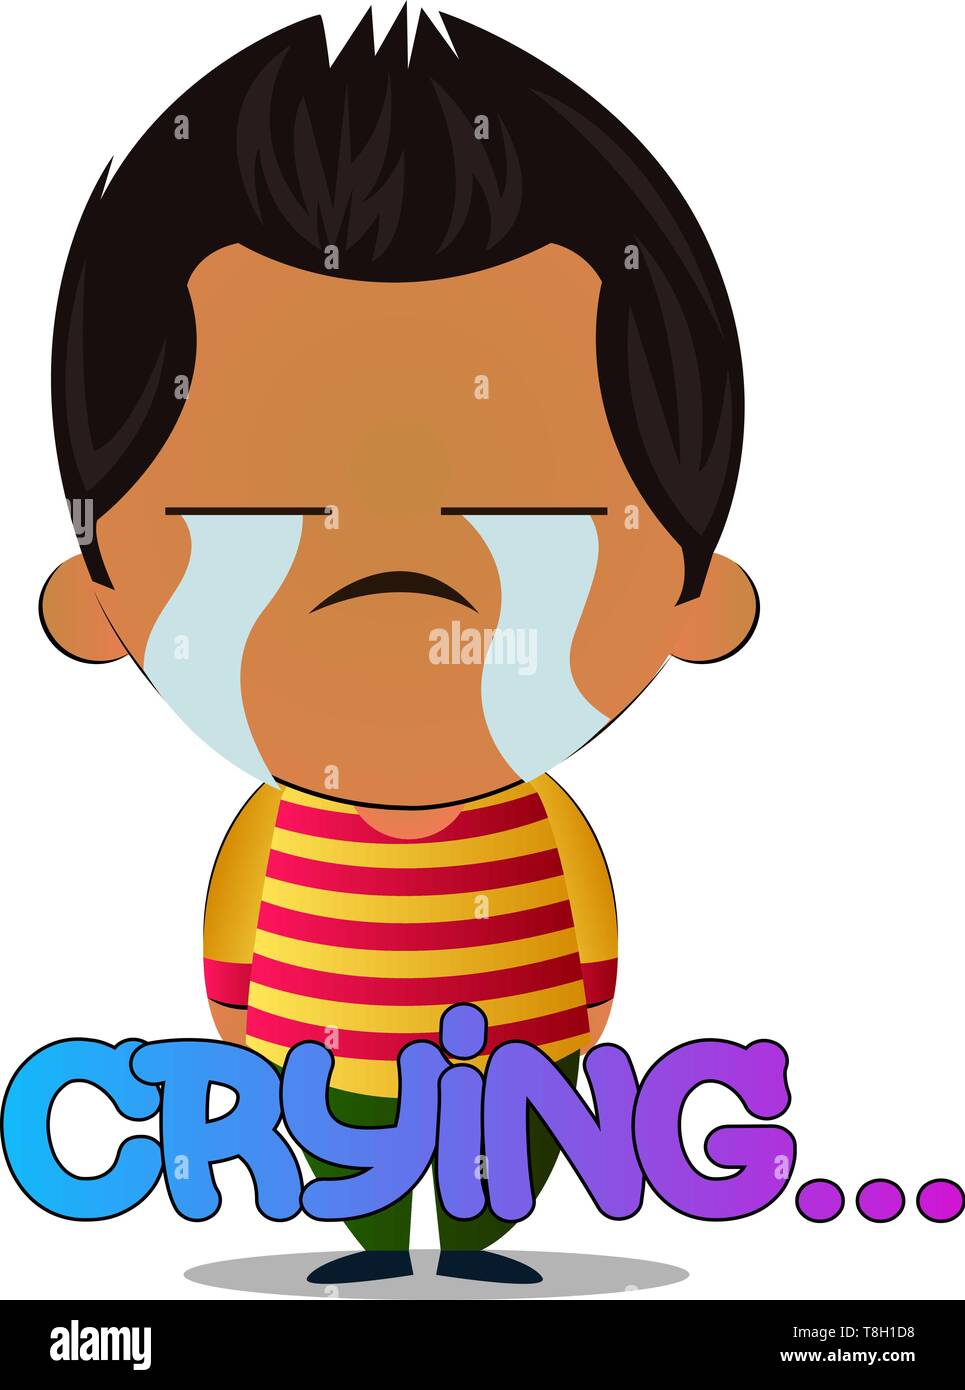 Boy is crying, illustration, vector on white background. Stock Vector